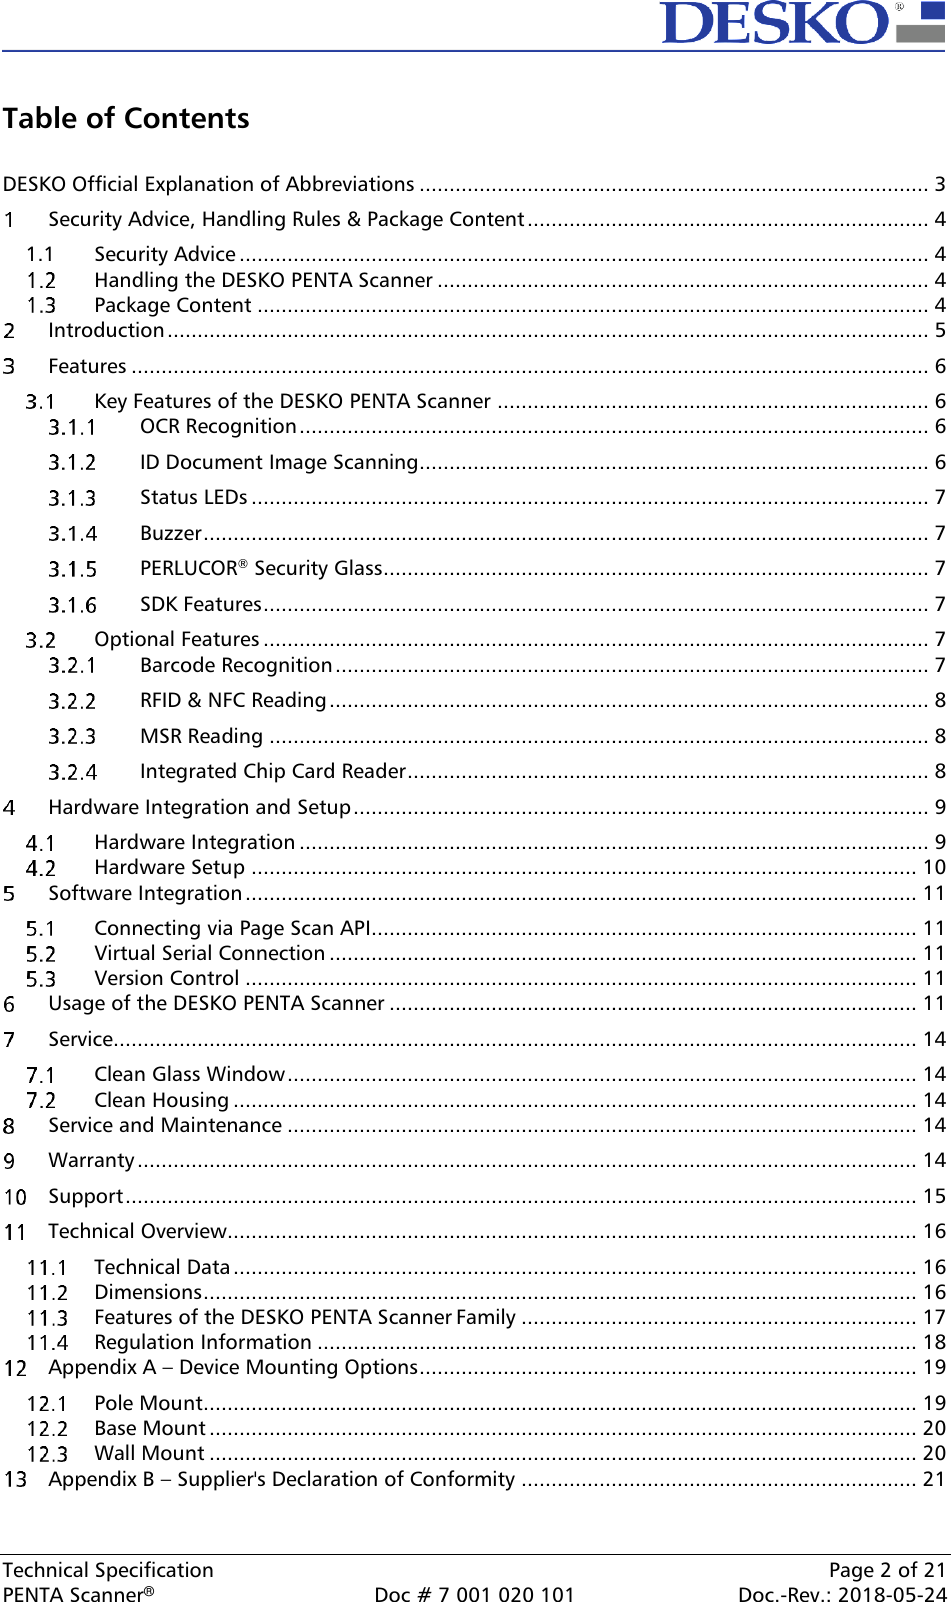  Technical Specification    Page 2 of 21 PENTA Scanner®  Doc # 7 001 020 101  Doc.-Rev.: 2018-05-24  Table of Contents  DESKO Official Explanation of Abbreviations ..................................................................................... 3   Security Advice, Handling Rules &amp; Package Content ................................................................... 4 1.1  Security Advice ................................................................................................................... 4   Handling the DESKO PENTA Scanner .................................................................................. 4   Package Content ................................................................................................................ 4   Introduction ............................................................................................................................... 5   Features ..................................................................................................................................... 6   Key Features of the DESKO PENTA Scanner ........................................................................ 6   OCR Recognition ......................................................................................................... 6   ID Document Image Scanning..................................................................................... 6   Status LEDs ................................................................................................................. 7   Buzzer ......................................................................................................................... 7   PERLUCOR® Security Glass ........................................................................................... 7   SDK Features ............................................................................................................... 7   Optional Features ............................................................................................................... 7   Barcode Recognition ................................................................................................... 7   RFID &amp; NFC Reading .................................................................................................... 8   MSR Reading .............................................................................................................. 8   Integrated Chip Card Reader ....................................................................................... 8   Hardware Integration and Setup ................................................................................................ 9   Hardware Integration ......................................................................................................... 9   Hardware Setup ............................................................................................................... 10   Software Integration ................................................................................................................ 11   Connecting via Page Scan API........................................................................................... 11   Virtual Serial Connection .................................................................................................. 11   Version Control ................................................................................................................ 11   Usage of the DESKO PENTA Scanner ........................................................................................ 11   Service...................................................................................................................................... 14   Clean Glass Window ......................................................................................................... 14   Clean Housing .................................................................................................................. 14   Service and Maintenance ......................................................................................................... 14   Warranty .................................................................................................................................. 14   Support .................................................................................................................................... 15   Technical Overview................................................................................................................... 16   Technical Data .................................................................................................................. 16   Dimensions ....................................................................................................................... 16   Features of the DESKO PENTA Scanner Family .................................................................. 17   Regulation Information .................................................................................................... 18   Appendix A – Device Mounting Options ................................................................................... 19   Pole Mount ....................................................................................................................... 19   Base Mount ...................................................................................................................... 20   Wall Mount ...................................................................................................................... 20   Appendix B – Supplier&apos;s Declaration of Conformity .................................................................. 21  